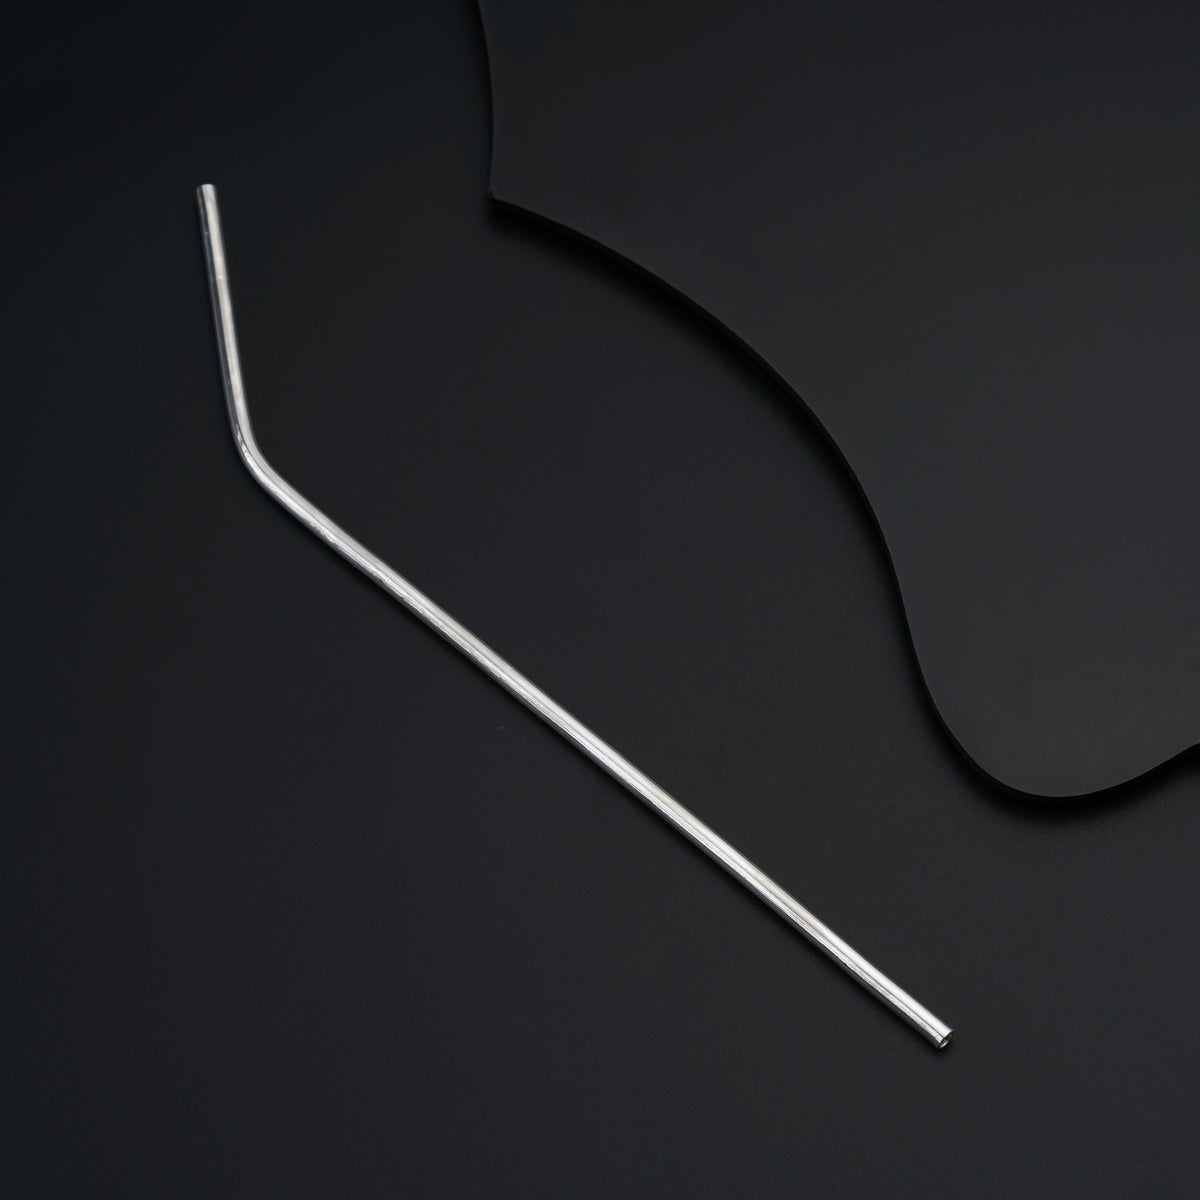 a pair of metal straws sitting on top of a black surface